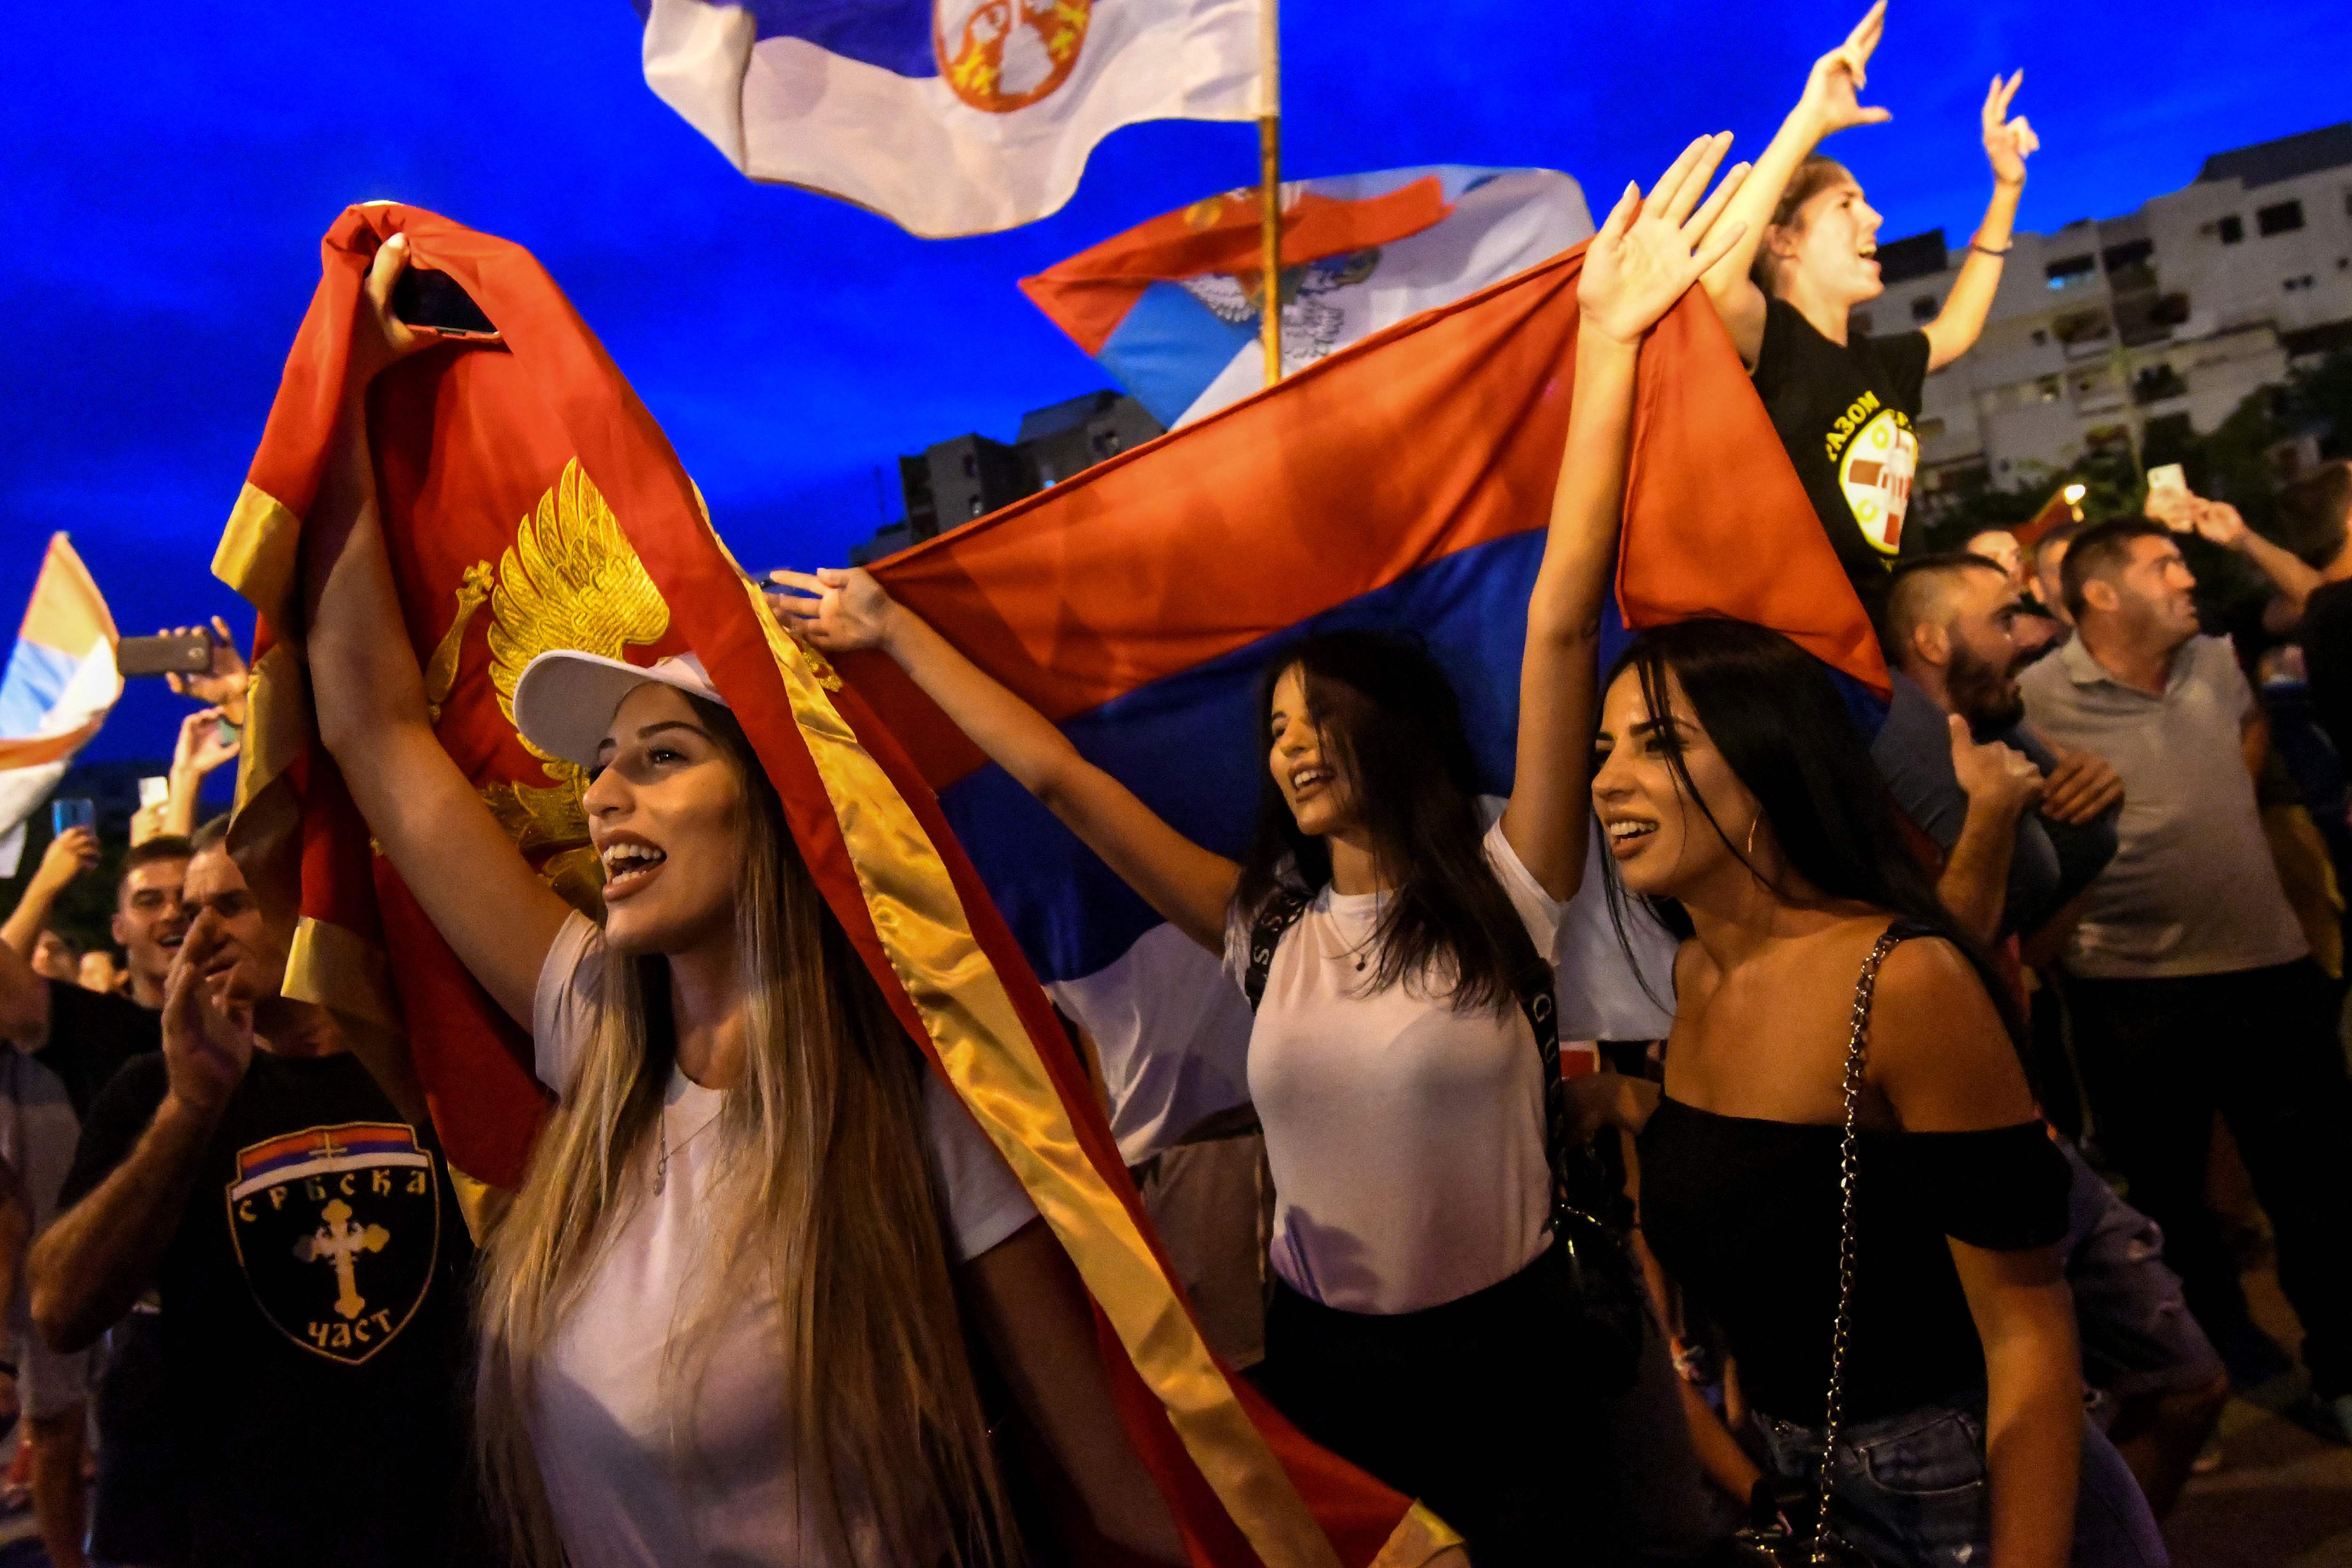 Opposition supporters celebrate on the streets after the general elections in Podgorica, Montenegro, on August 31, 2020. (Photo by SAVO PRELEVIC/AFP via Getty Images)